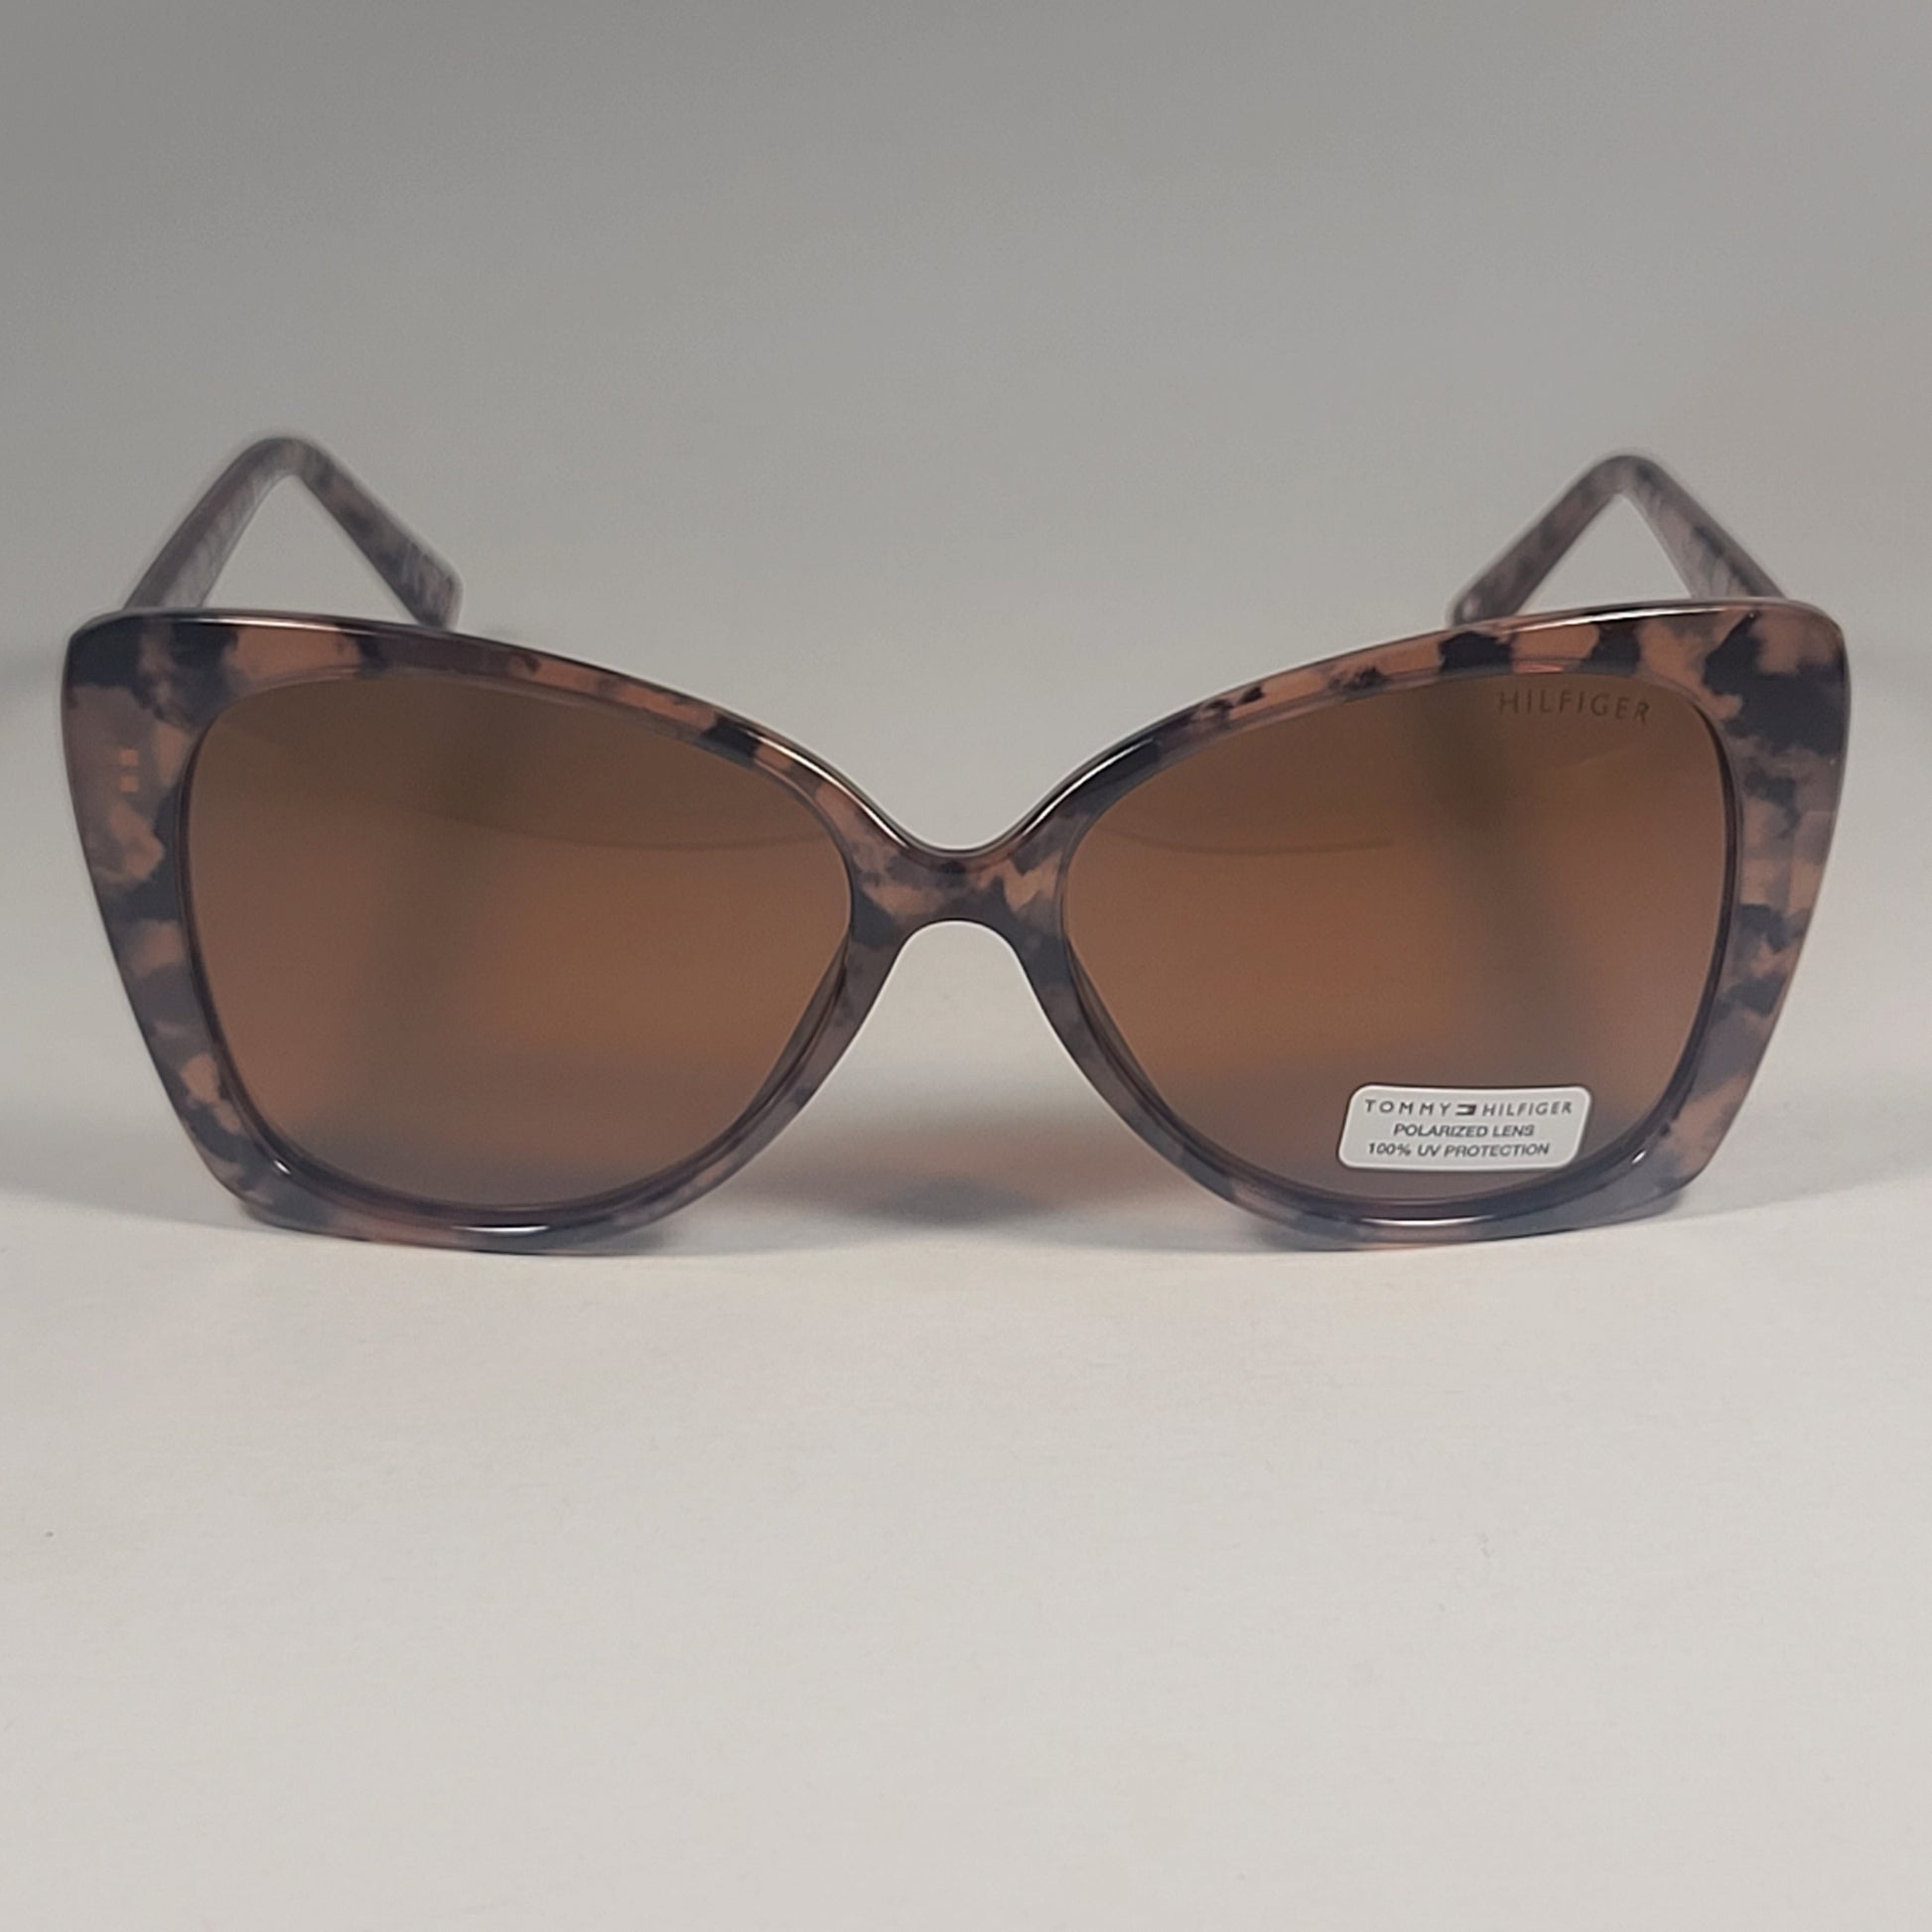 Tommy Hilfiger WP OL609P Polarized Butterfly Sunglasses Tortoise Brown Lens 56mm - Sunglasses